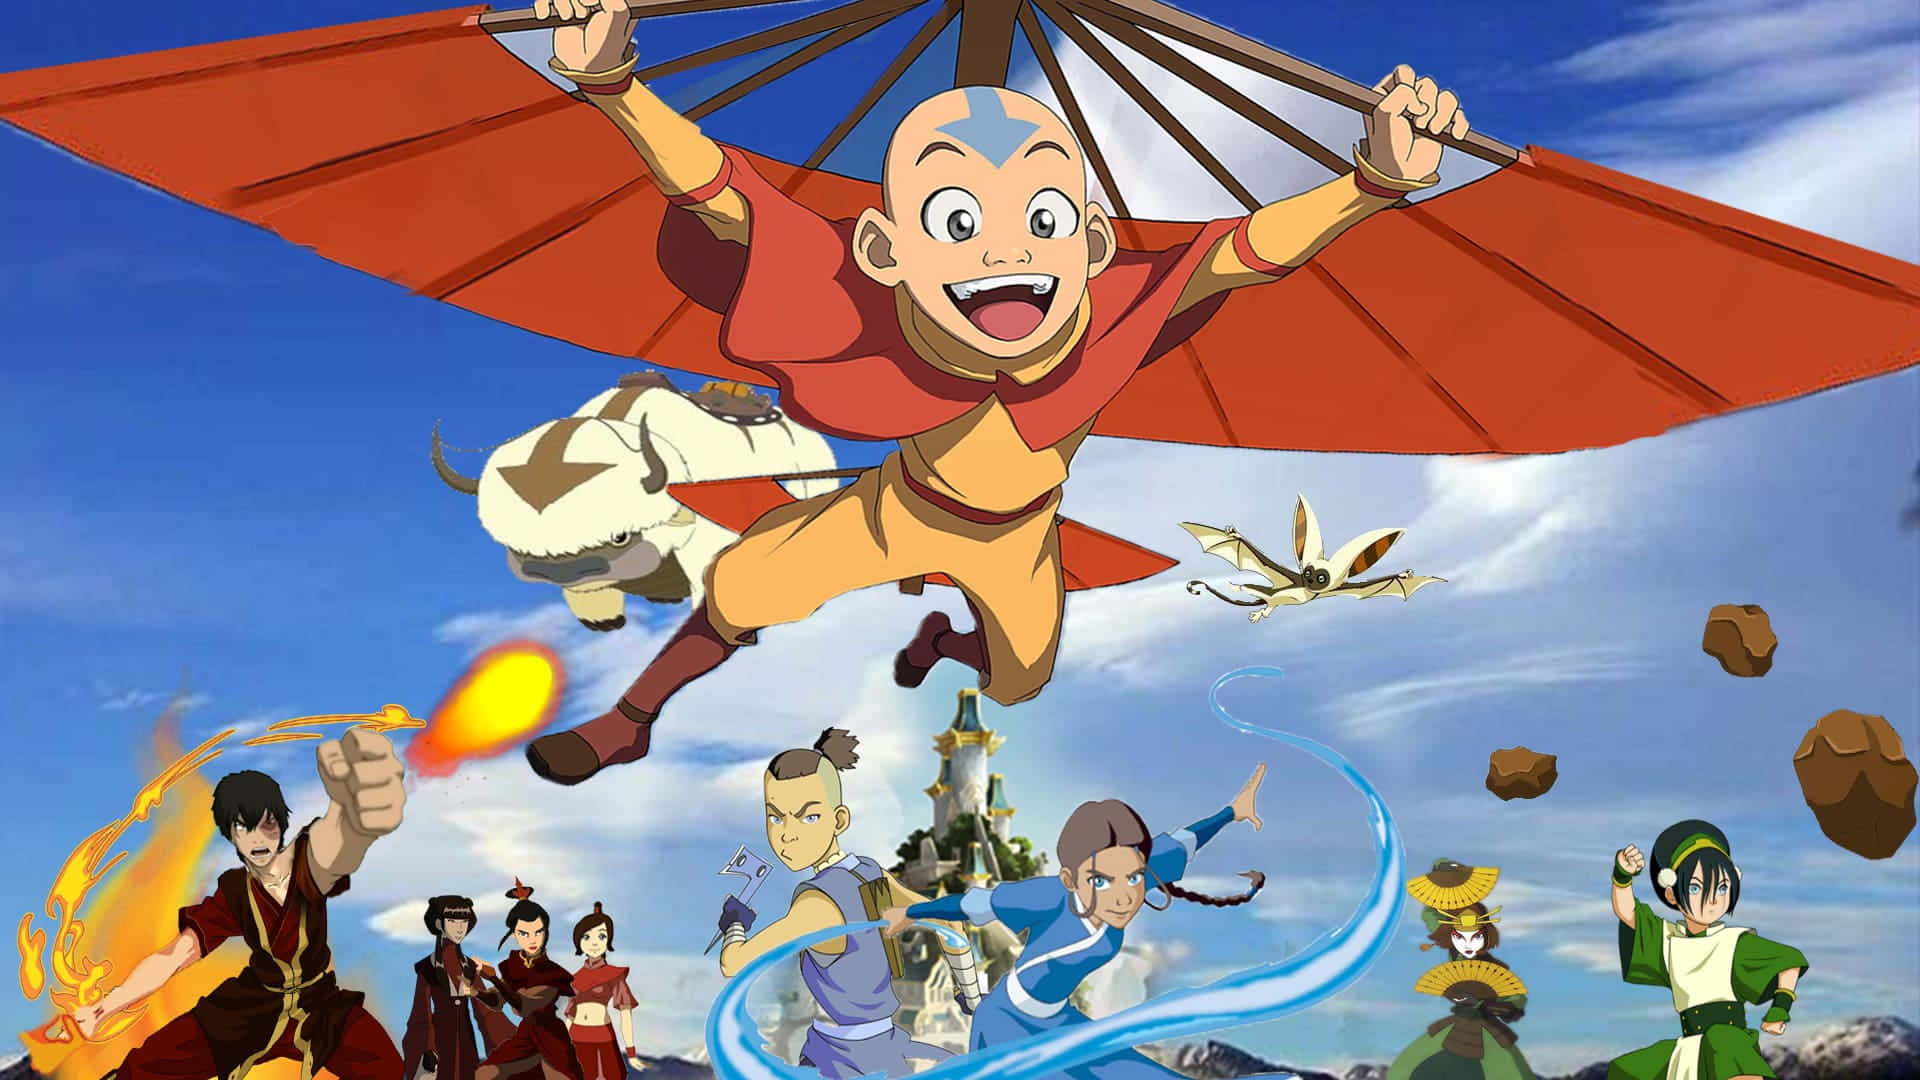 Ready for Battle: Aang, the Avatar from Avatar The Last Airbender